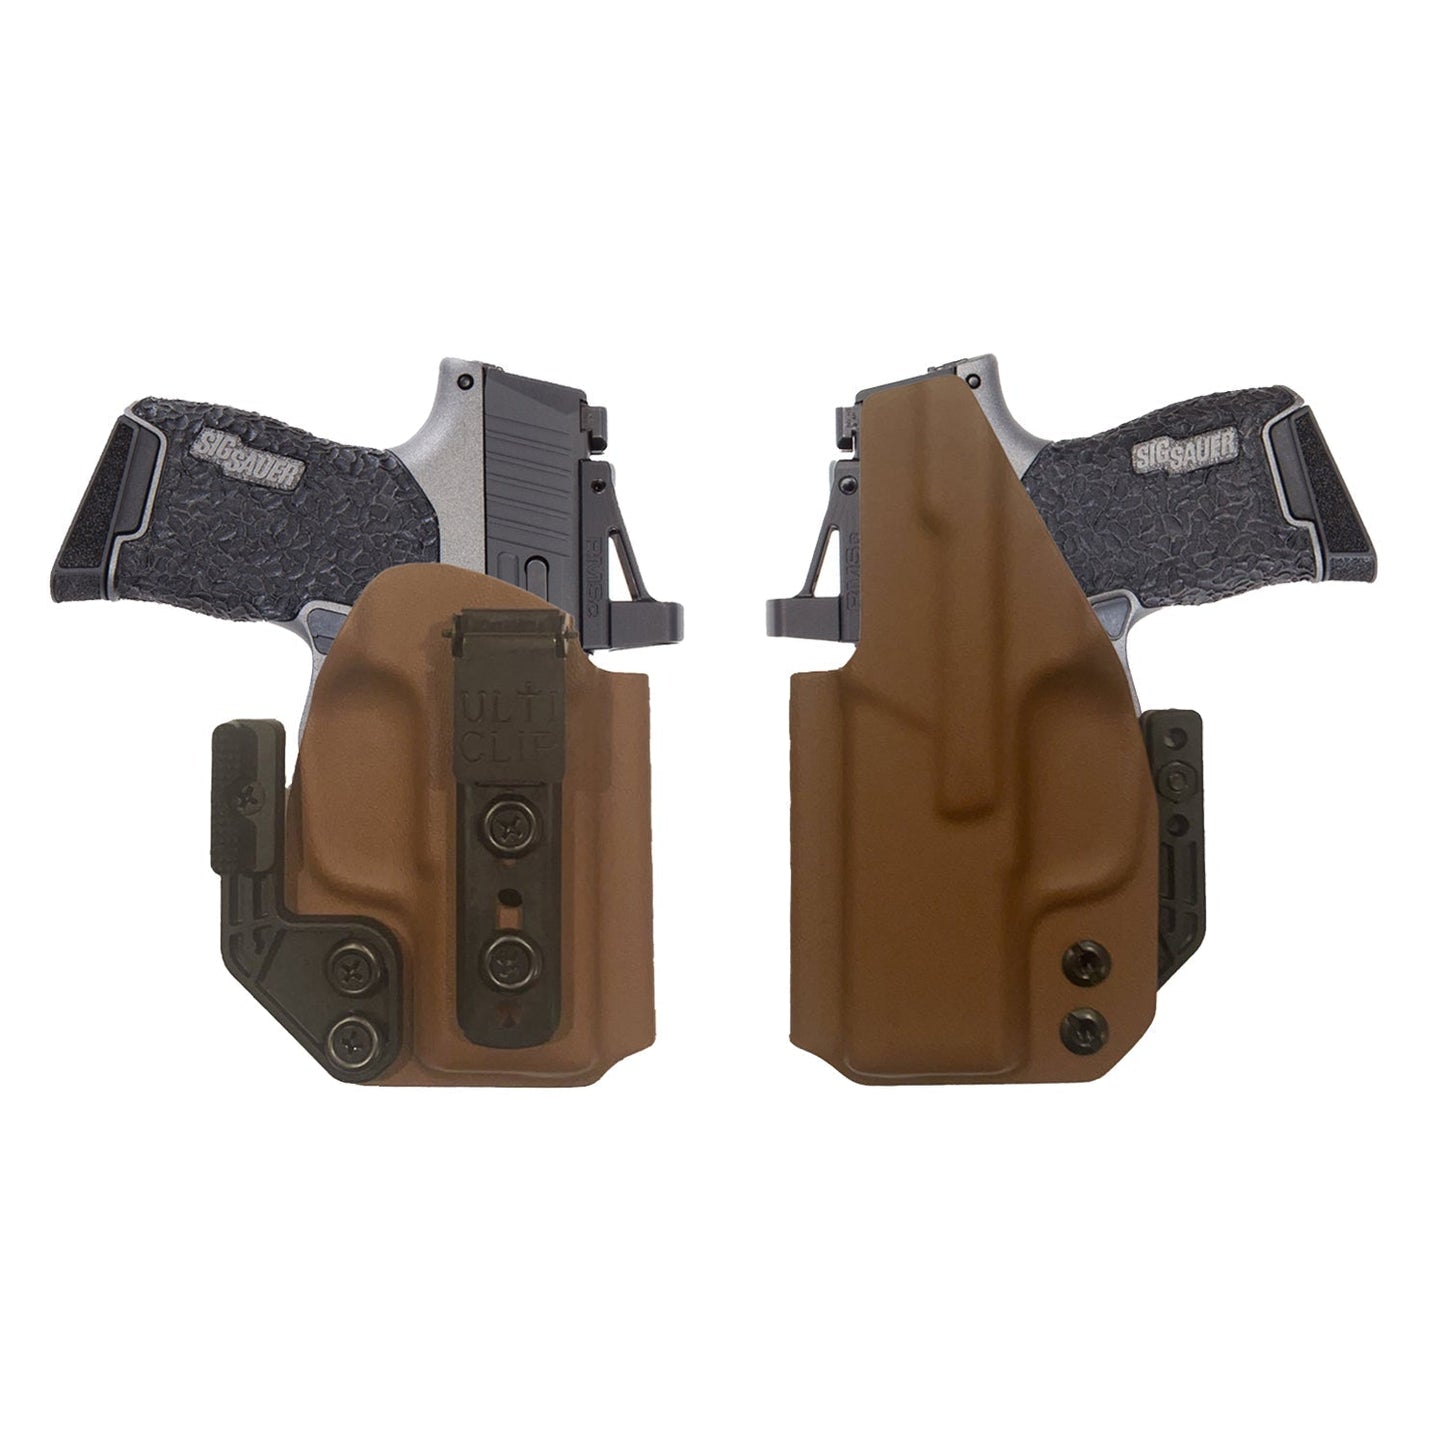 SIG P365XL WIth TLR6 Light (ULTI-CLIP 3) IWB (Inside The Waistband Holster)